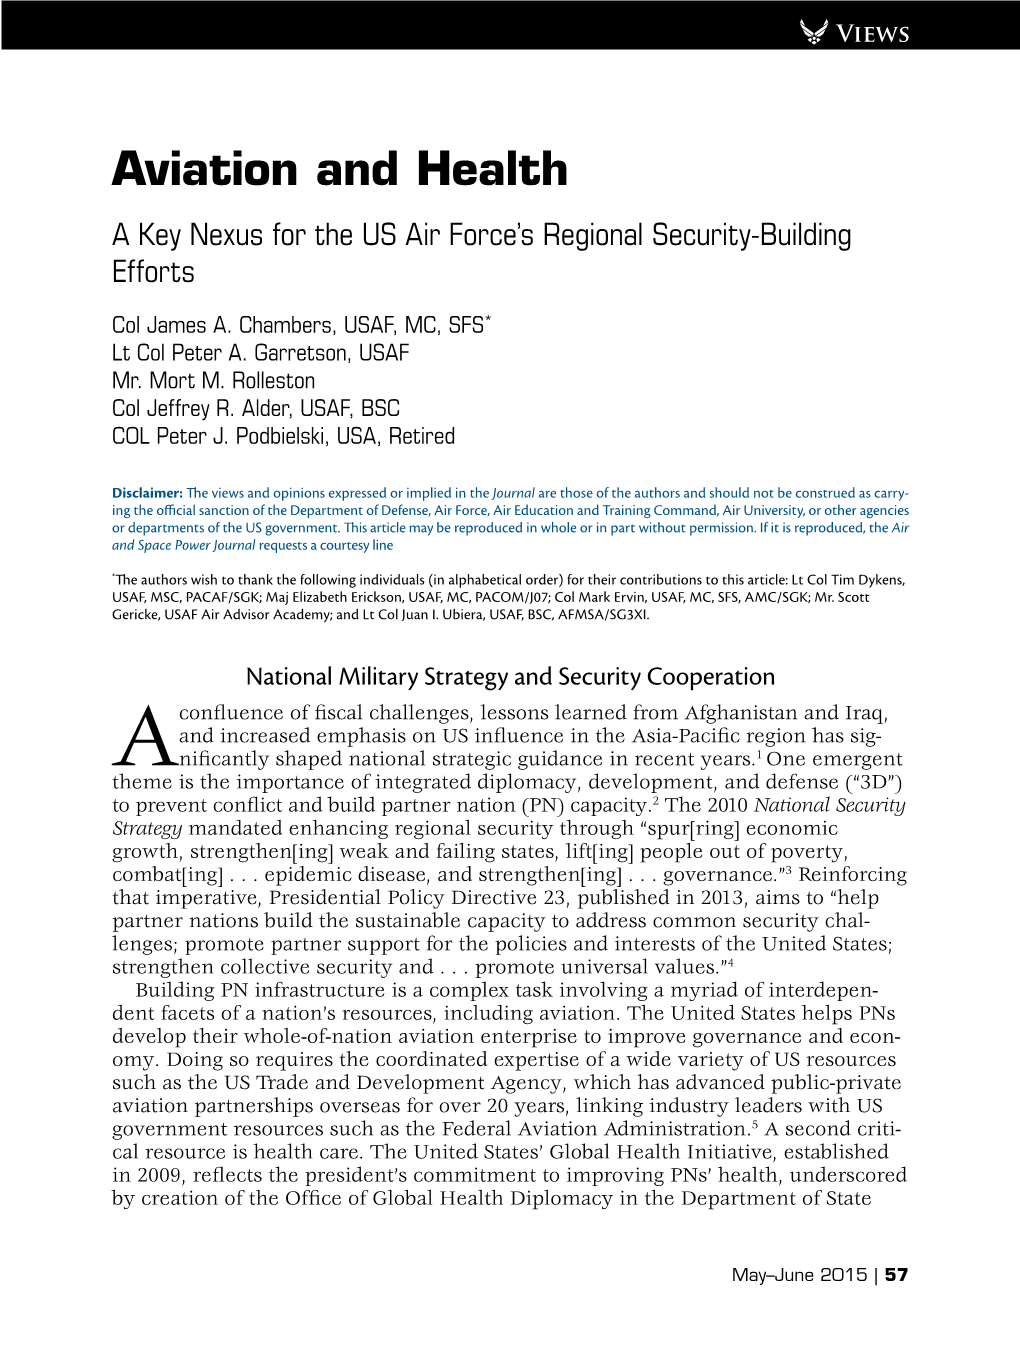 Aviation and Health: a Key Nexus for the US Air Force's Regional Security-Building Efforts